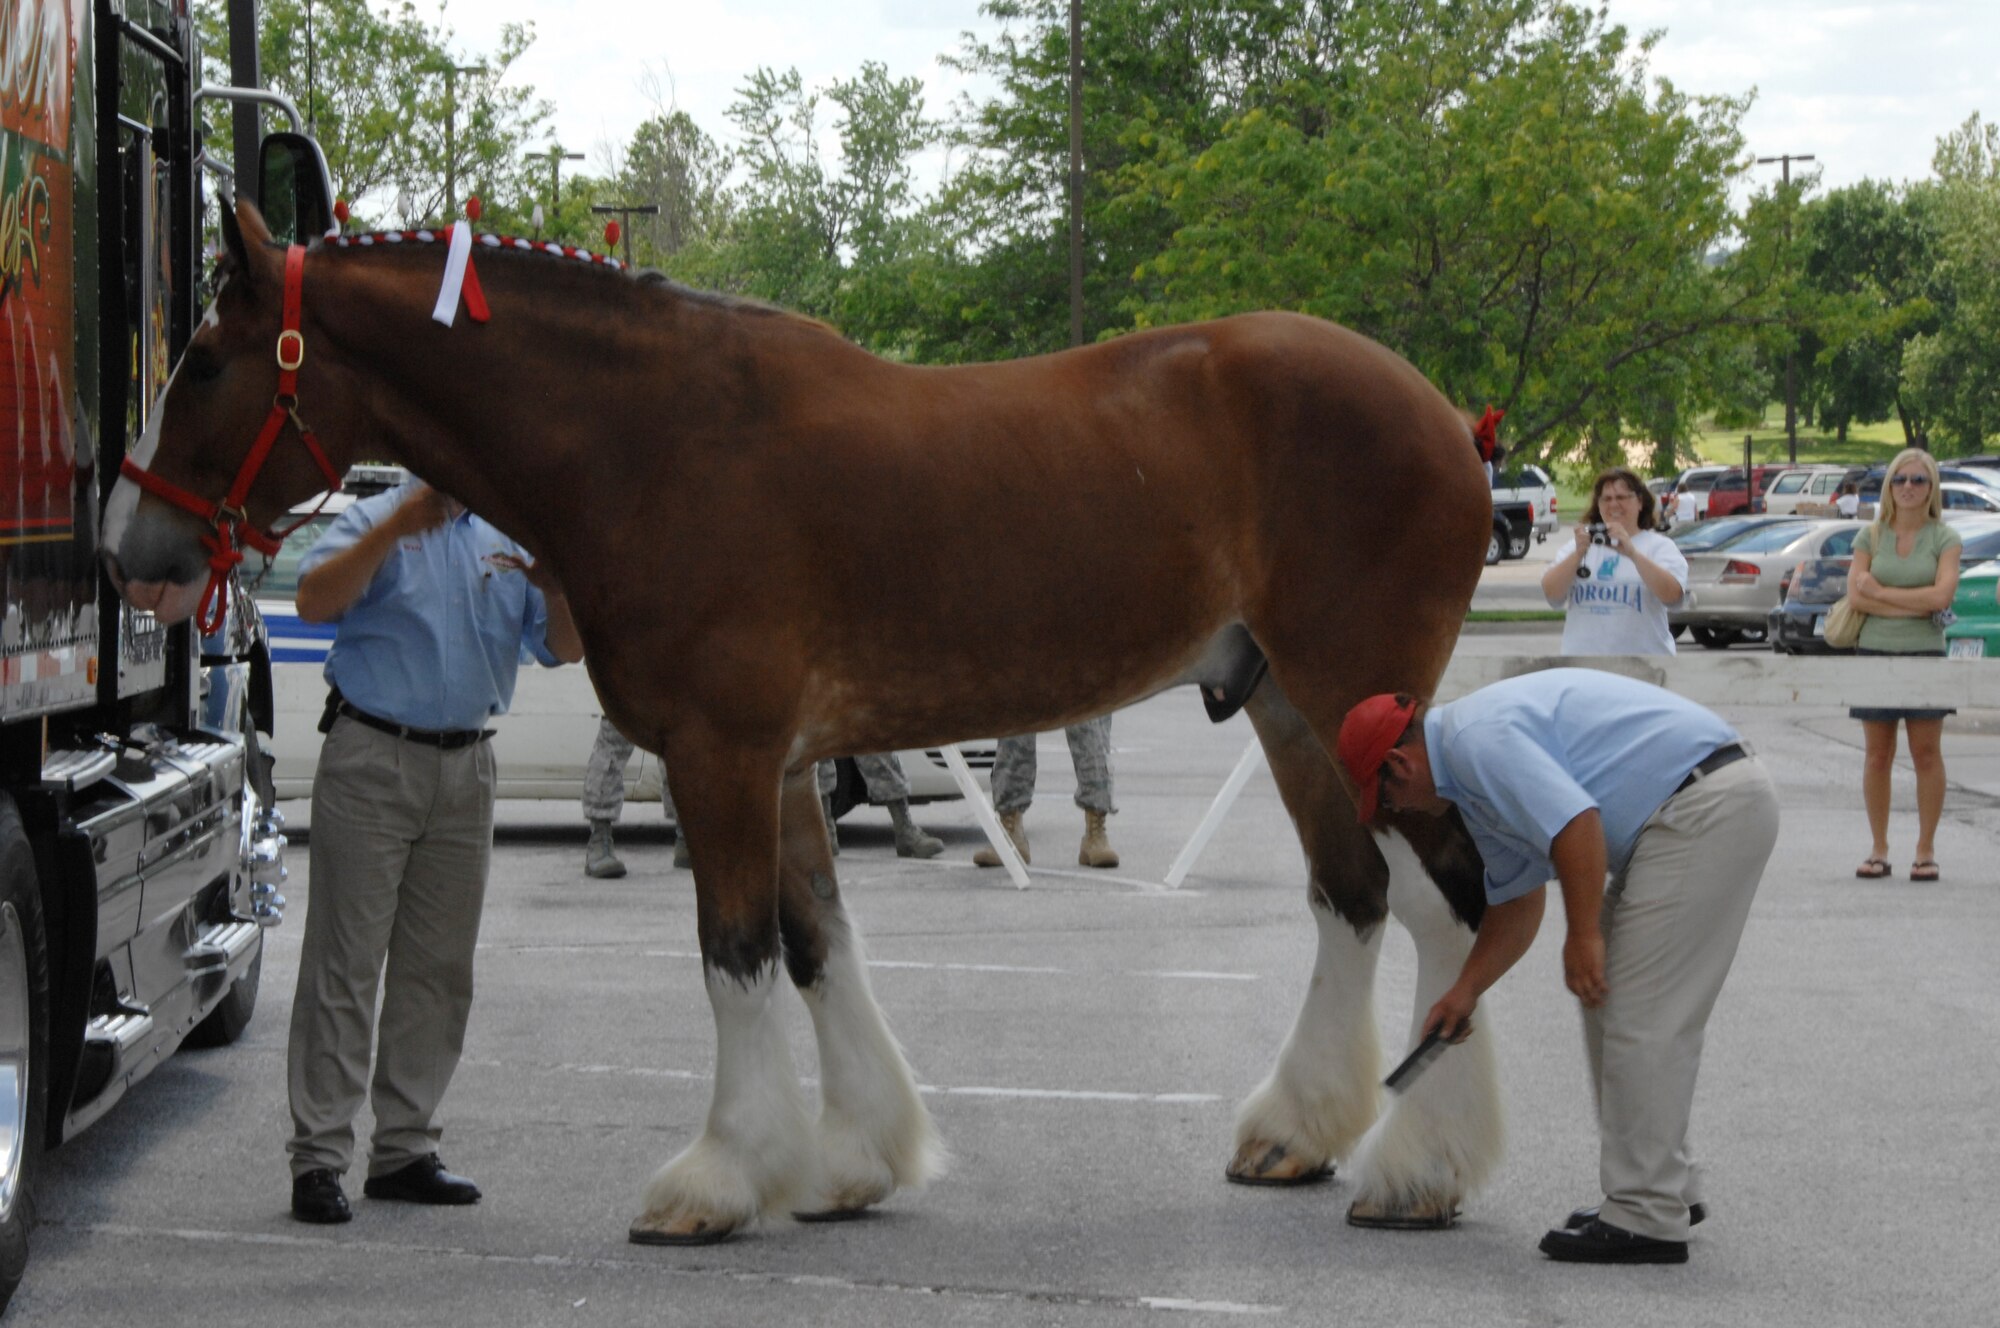 Members of the Budweiser Clydesdales team groom one of the horses before hitching him to a buggy. The Budweiser Clydesdales were at Offutt to salute the military. (U. S. Air Force Photo By/Dana P. Heard)